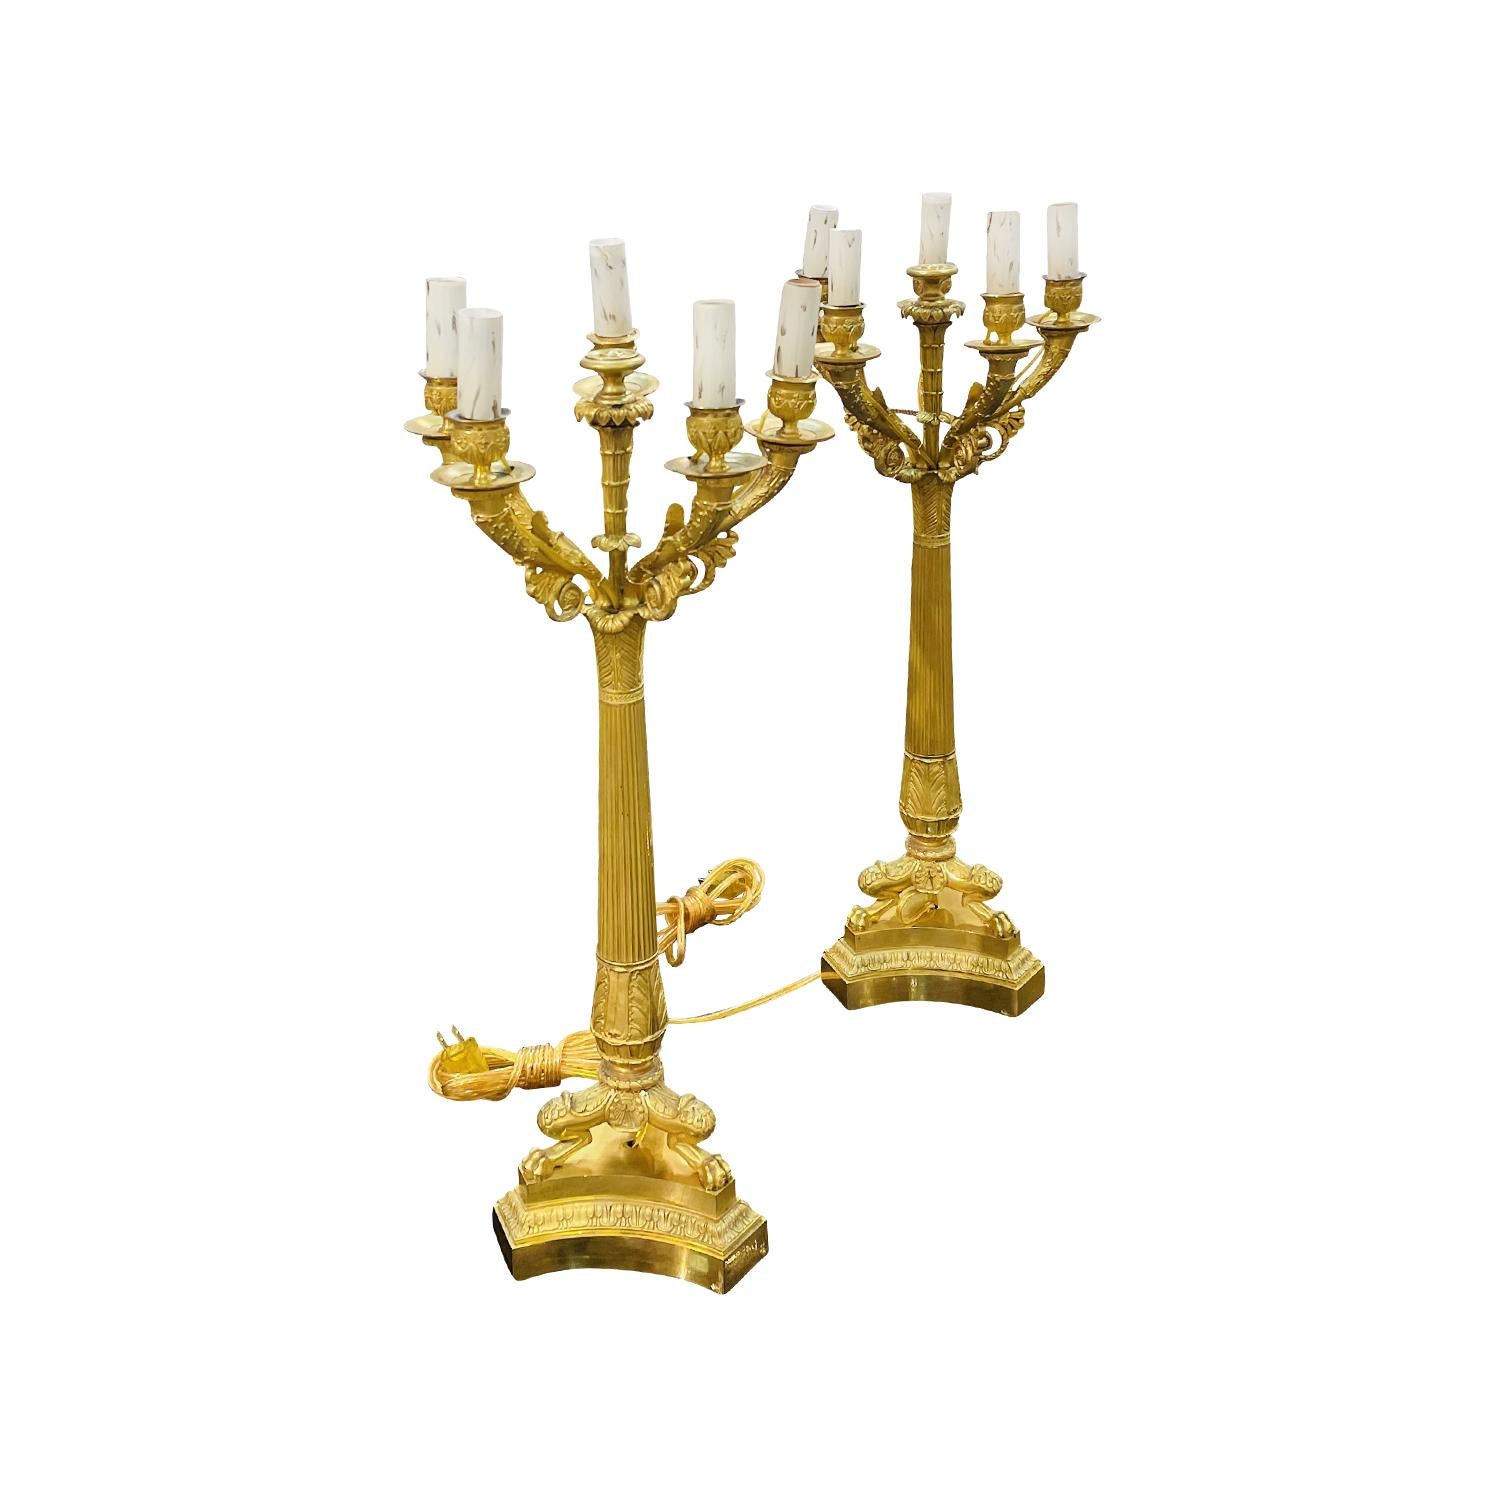 Hand-Crafted 19th Century French Pair of Charles X Bronze Candle Holders - Antique Lights For Sale